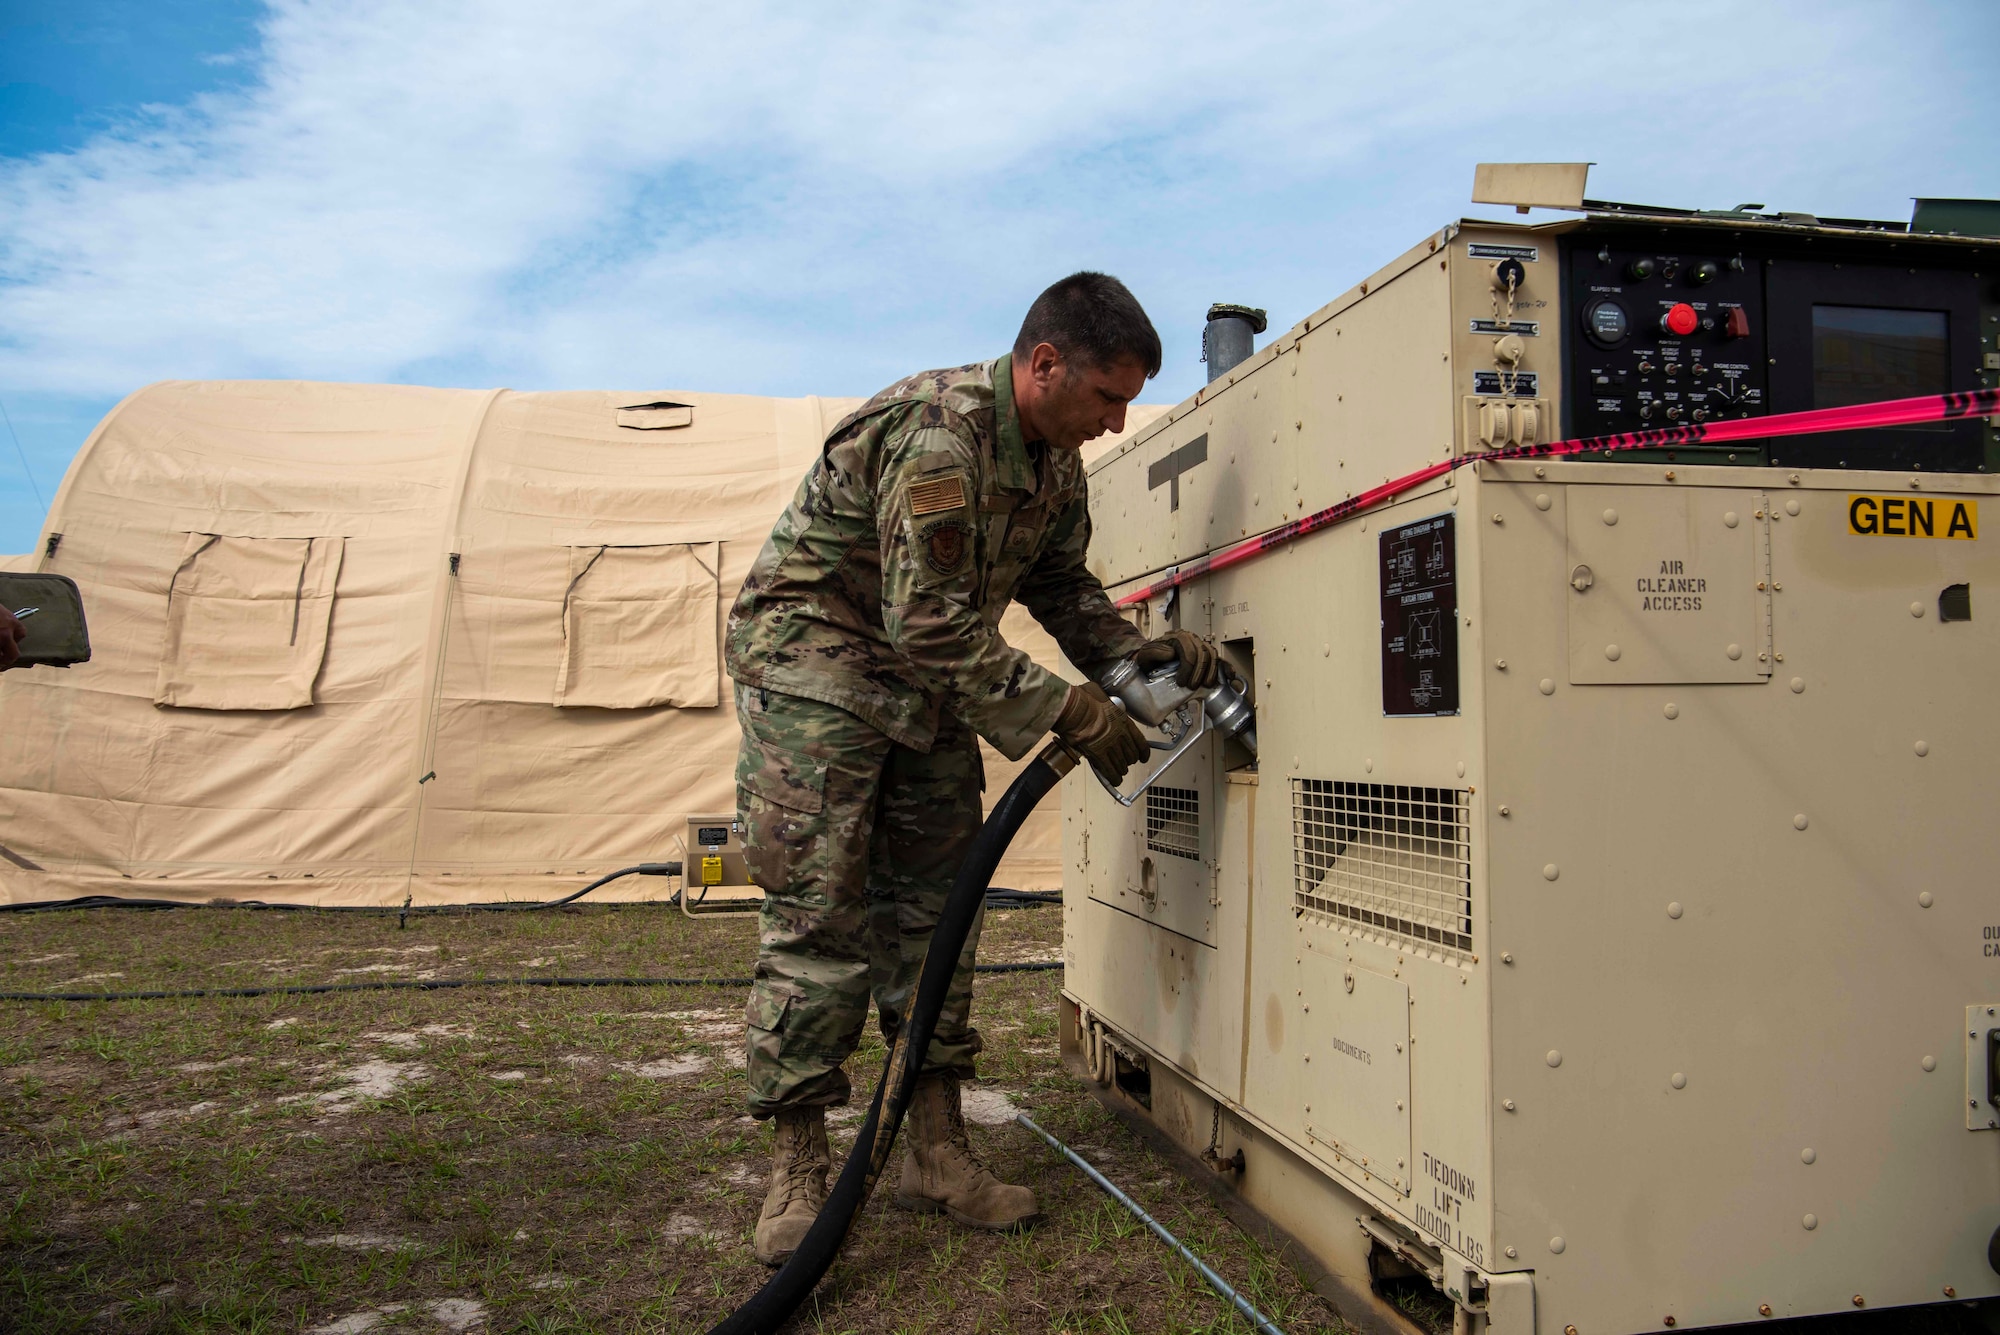 Master Sgt. Daniel Knez, 4th Logistics Readiness Squadron petroleum, oil and lubricants fuels a generator at Tyndall Air Force Base, Florida, May 1, 2021. POL is crucial to sustain aircraft and support ground forces. (U.S. Air Force photo by Airman Jordan Colvin)